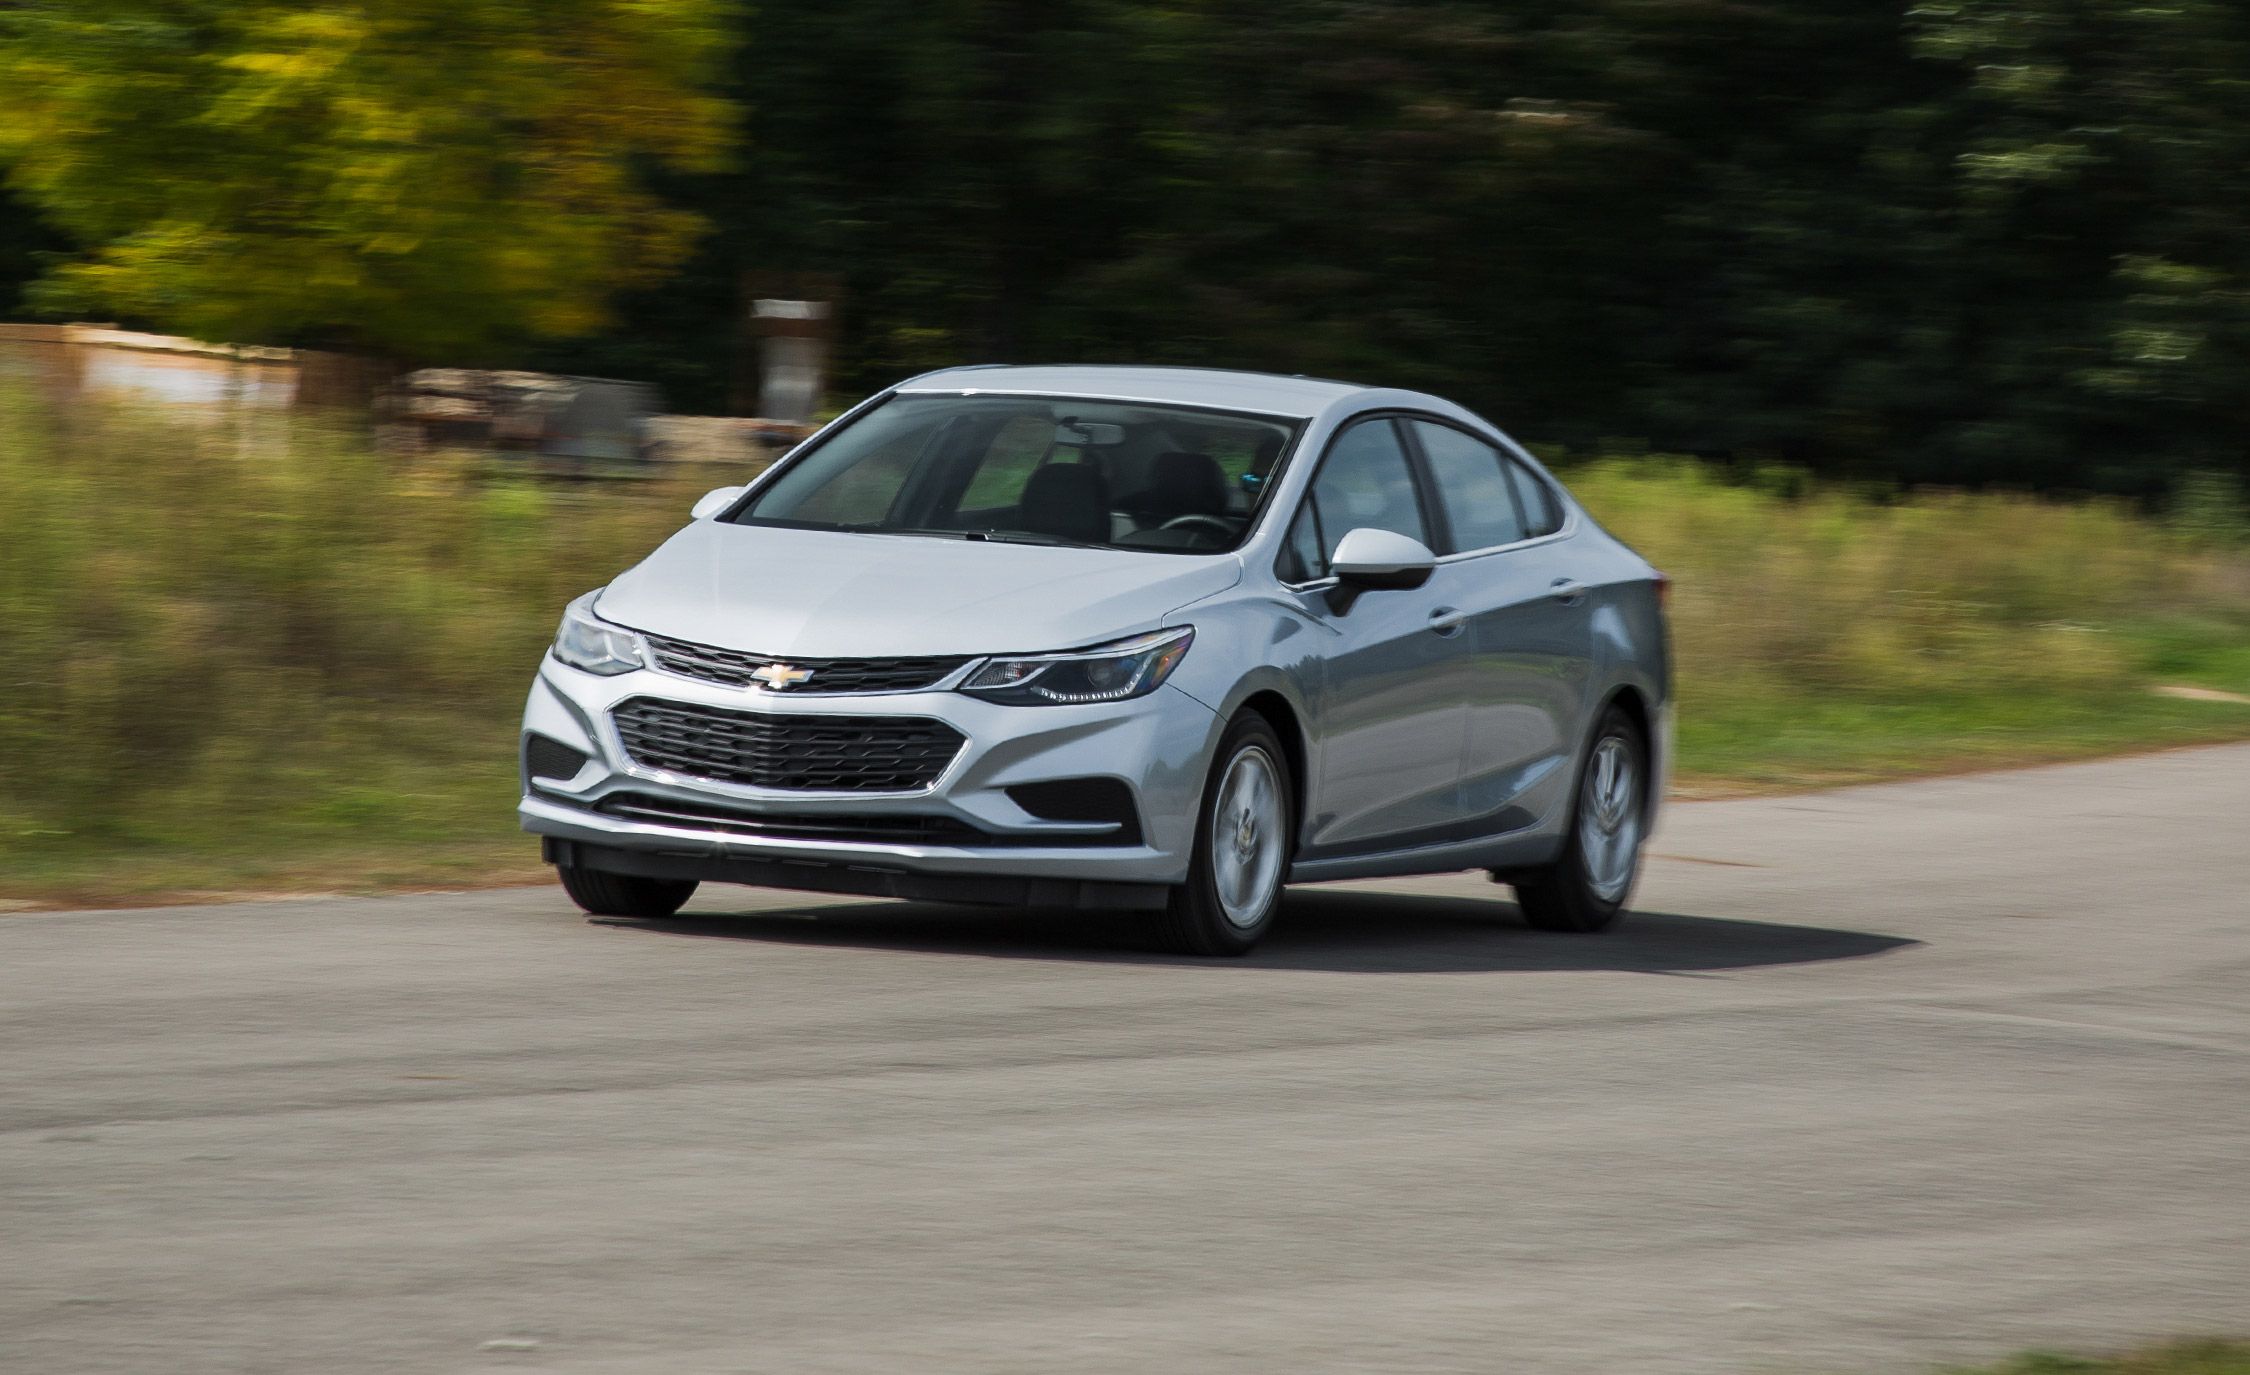 Tested: 2018 Chevrolet Cruze Diesel Manual Is Frugal and Shifty